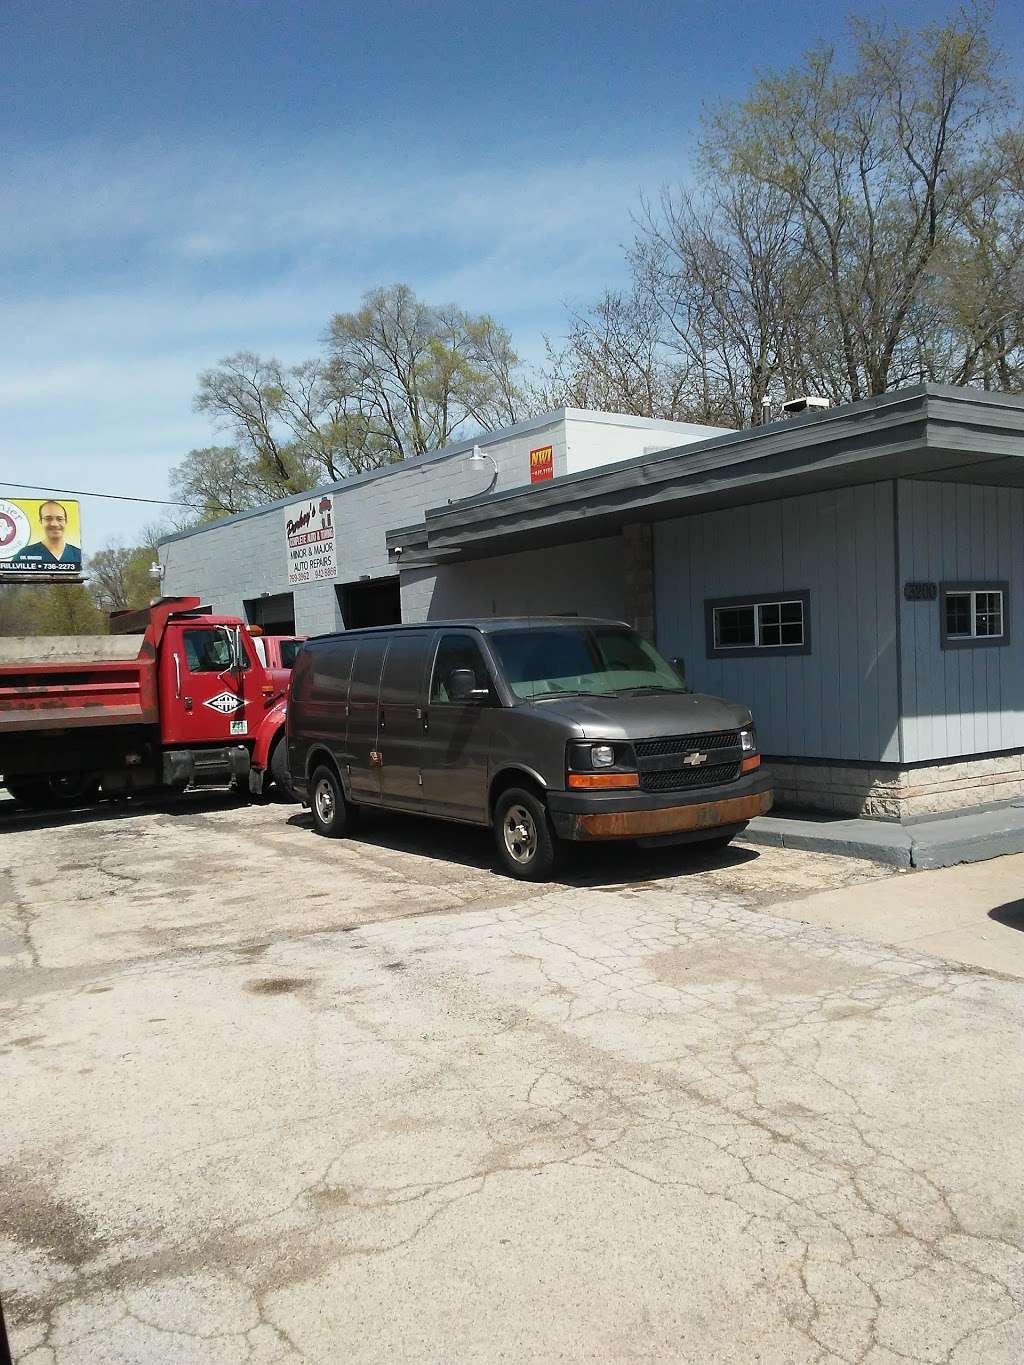 Purkeys Auto Repair & Towing | 3200 E 73rd Ave, Merrillville, IN 46410 | Phone: (219) 769-3962